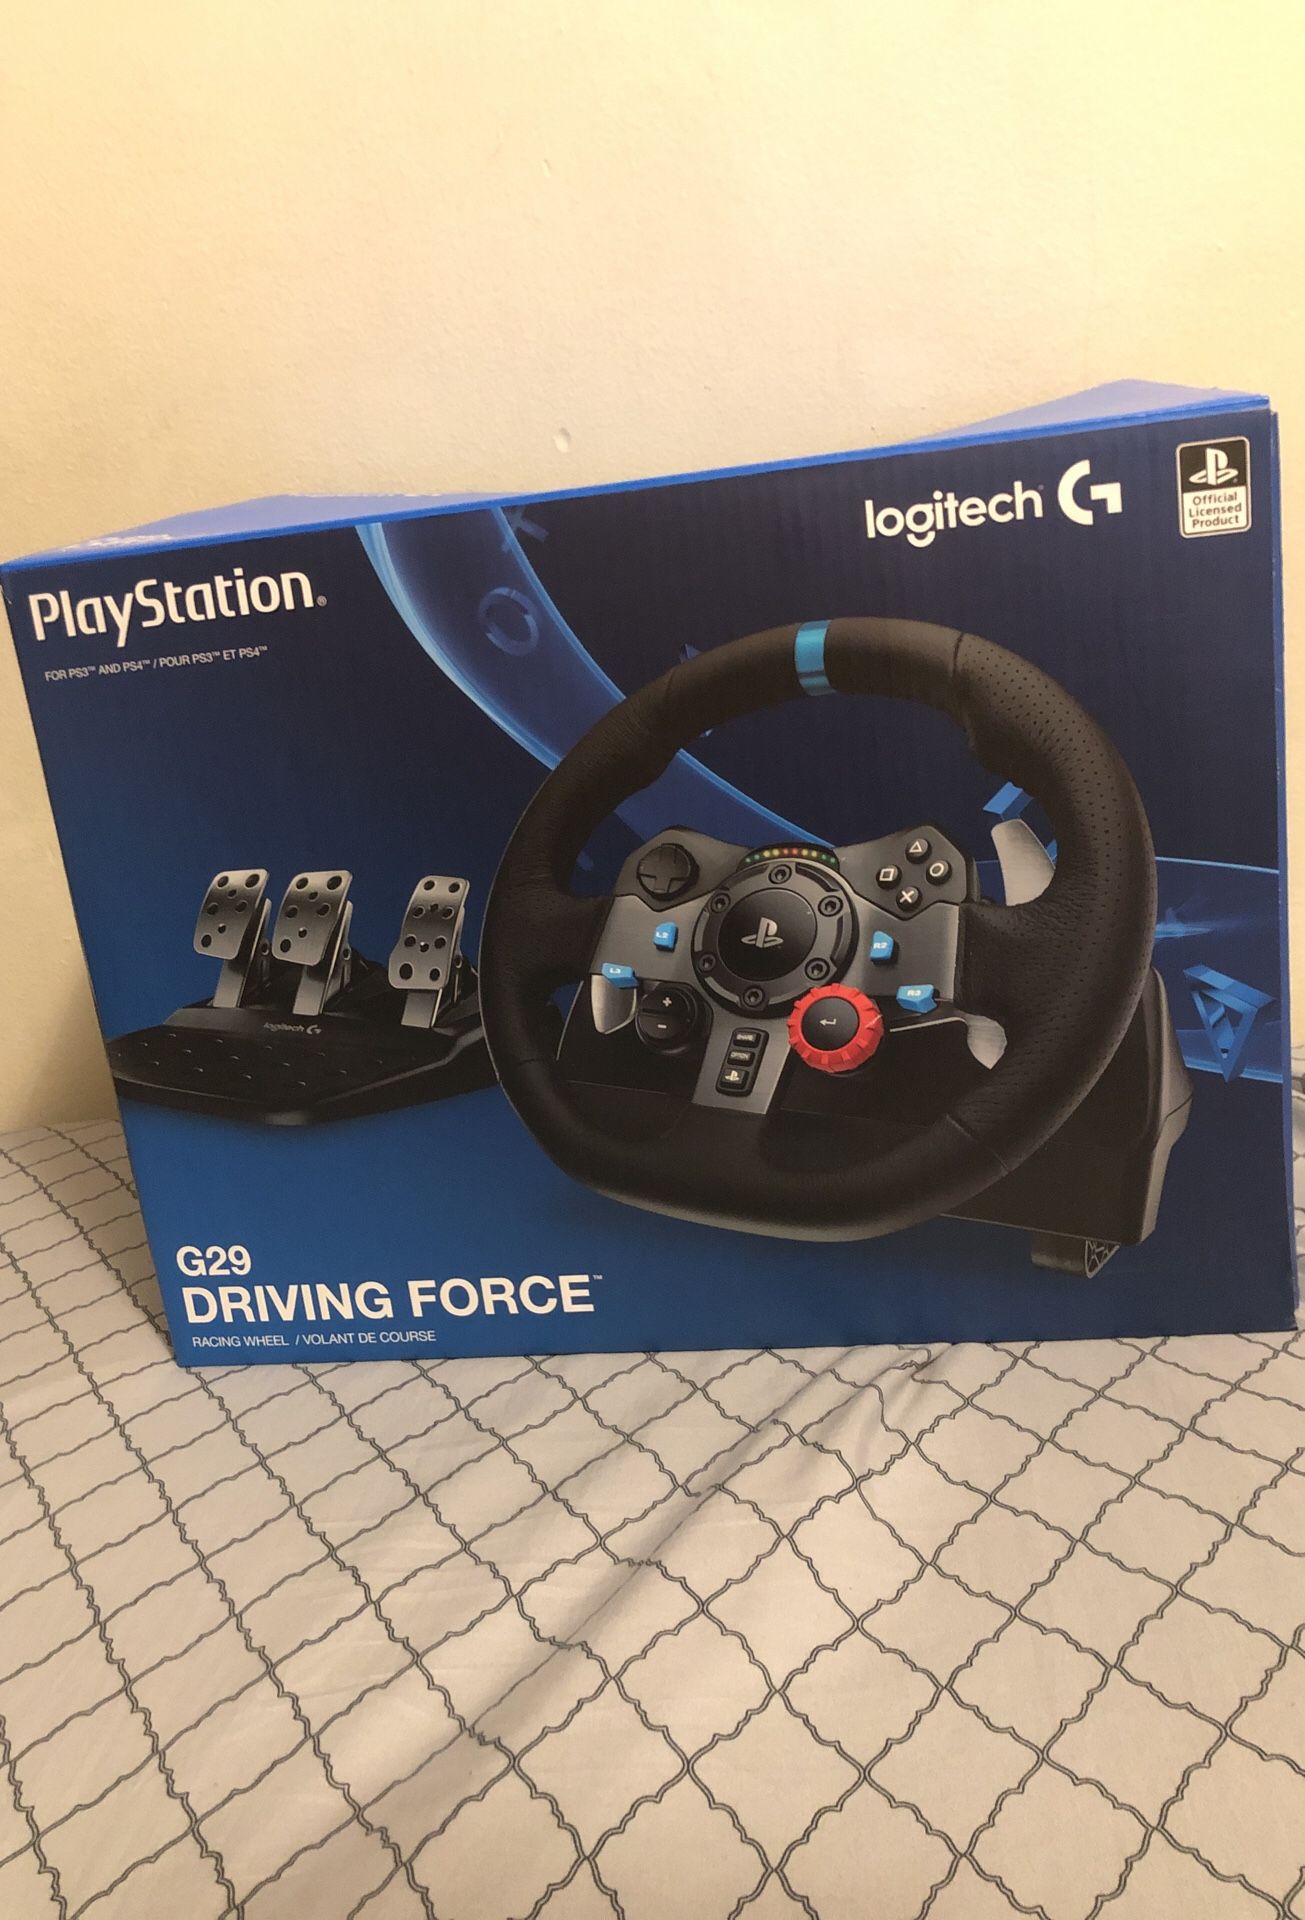 Volant PlayStation 4 Logitech Driving Force G29